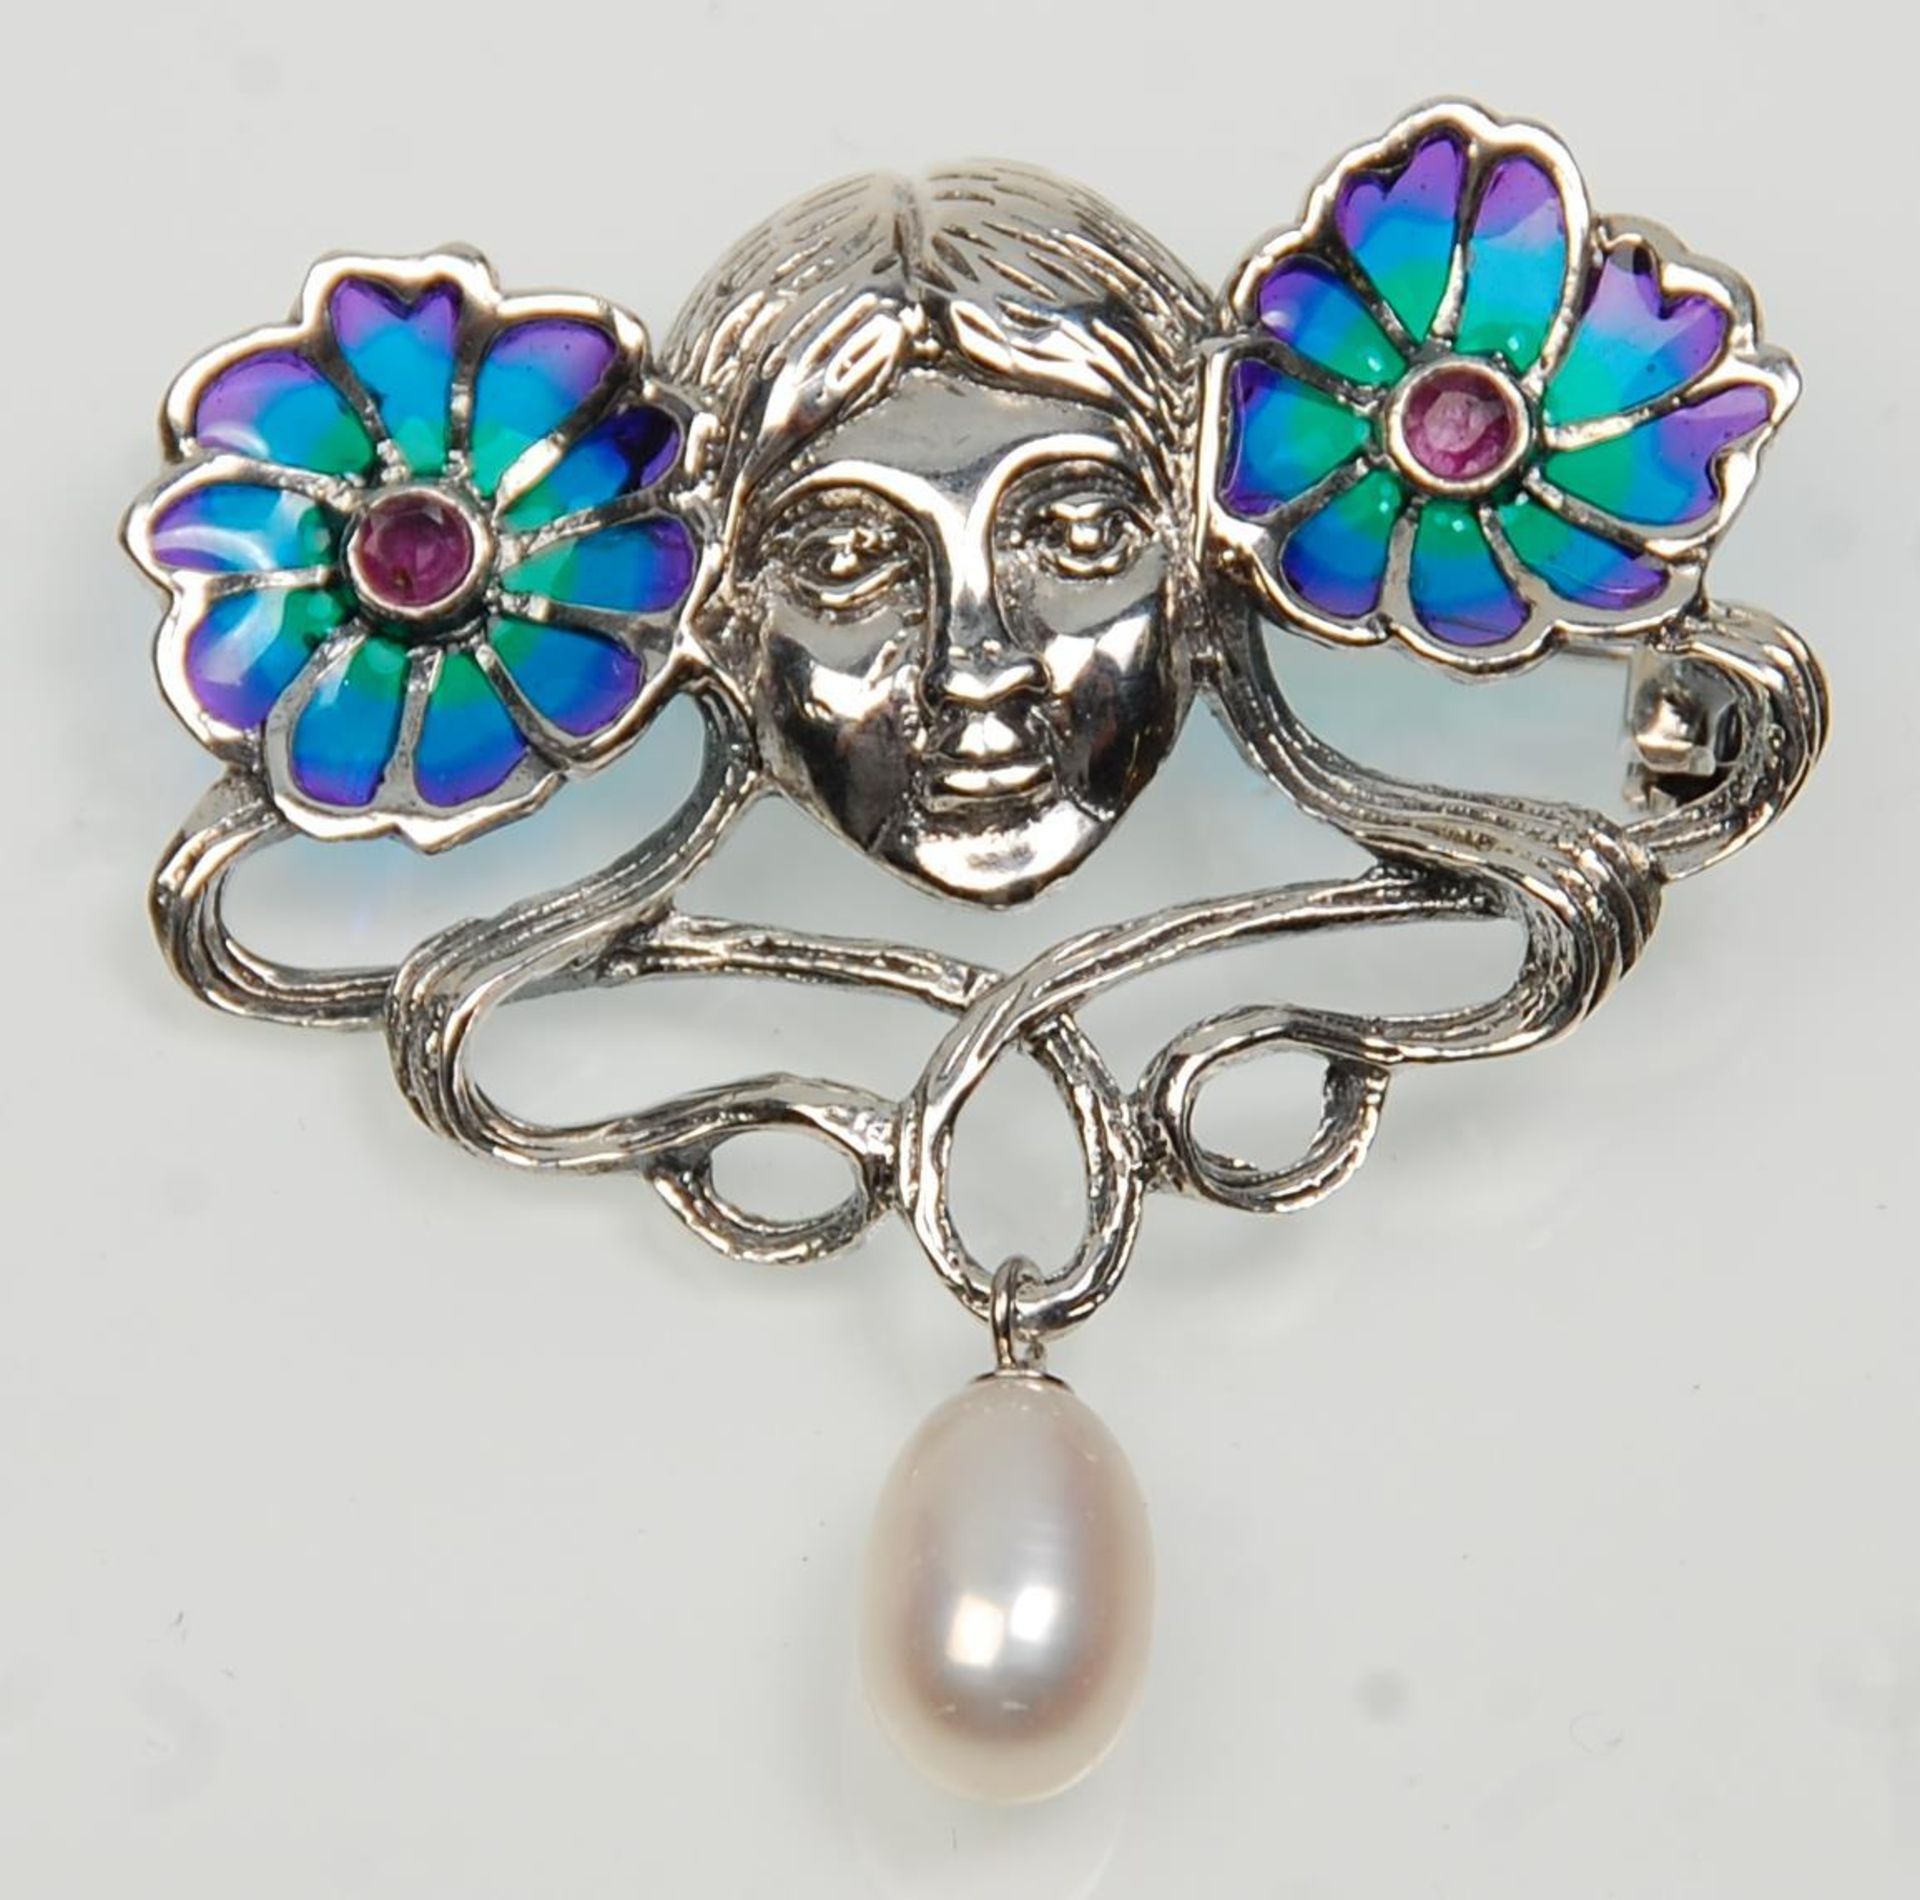 A stamped 925 silver Art Nouveau style brooch having a female face flanked by two plique a jour